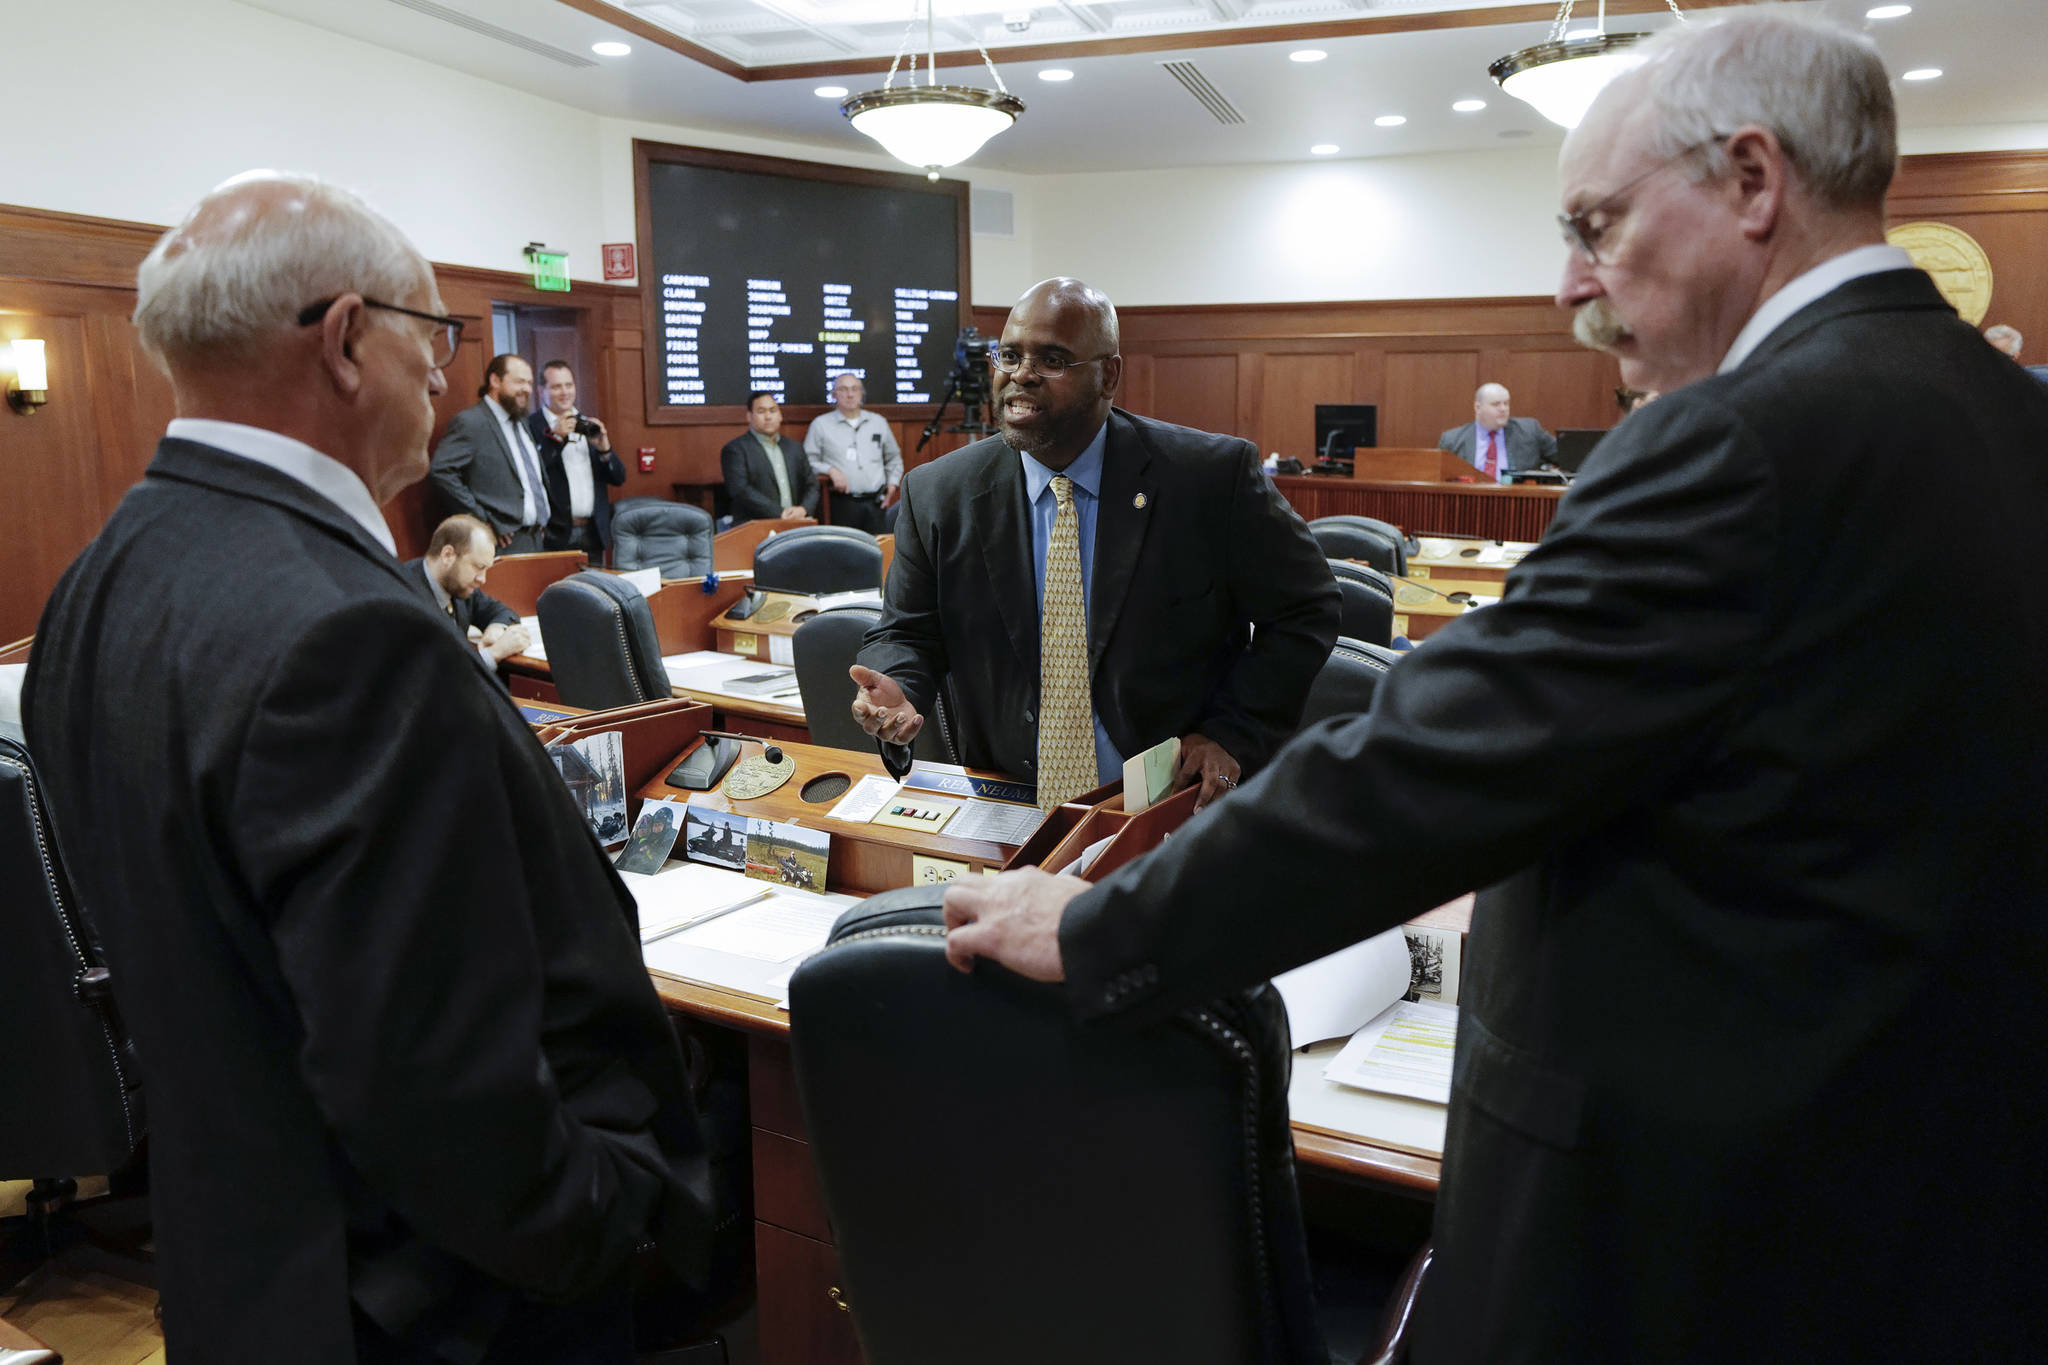 Sen. David Wilson, R-Wasilla, center, has a heated discussion with Sen. John Coghill, North Pole, left, as Sen. Bert Stedman, R-Sitka, listens before a Joint Session of Alaska Legislature at the Capitol on Thursday, July 11, 2019, to debate and vote on an override of Gov. Mike Dunleavy’s budget vetoes. The vote didn’t take place because not enough legislators attended. (Michael Penn | Juneau Empire)